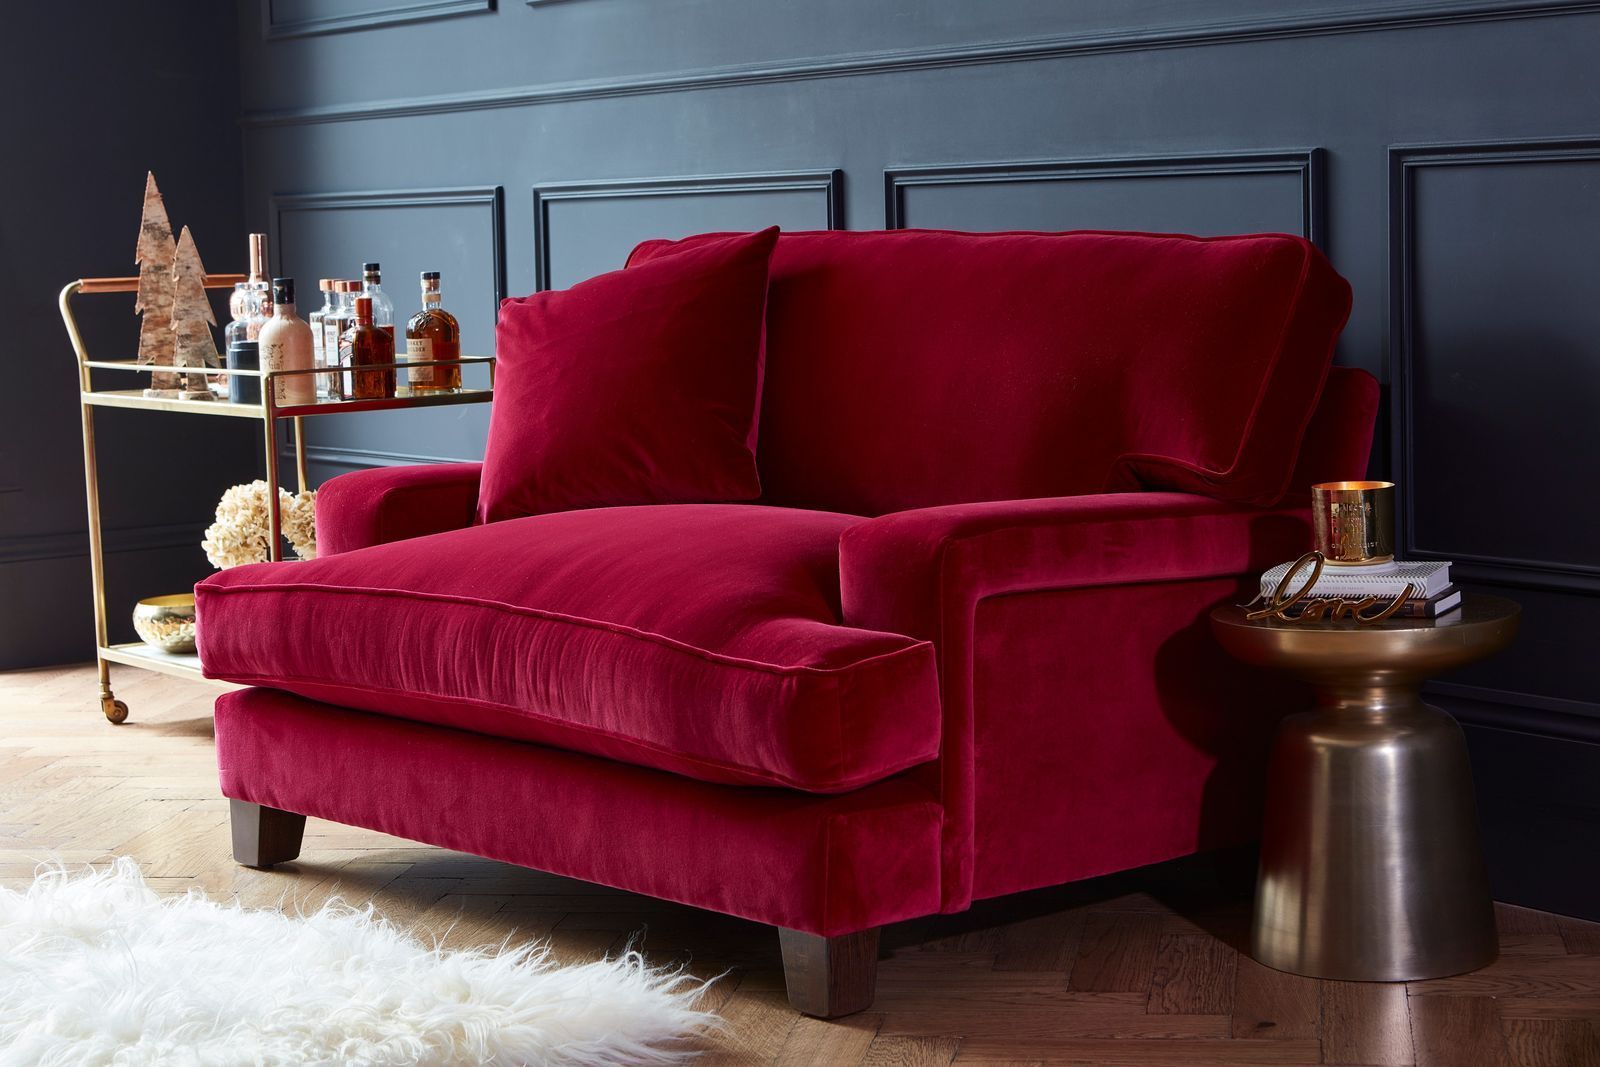 The Best Loveseats To Snuggle Up In | Velvet Sofa Living Room, Red Throughout Small Love Seats In Velvet (View 1 of 21)